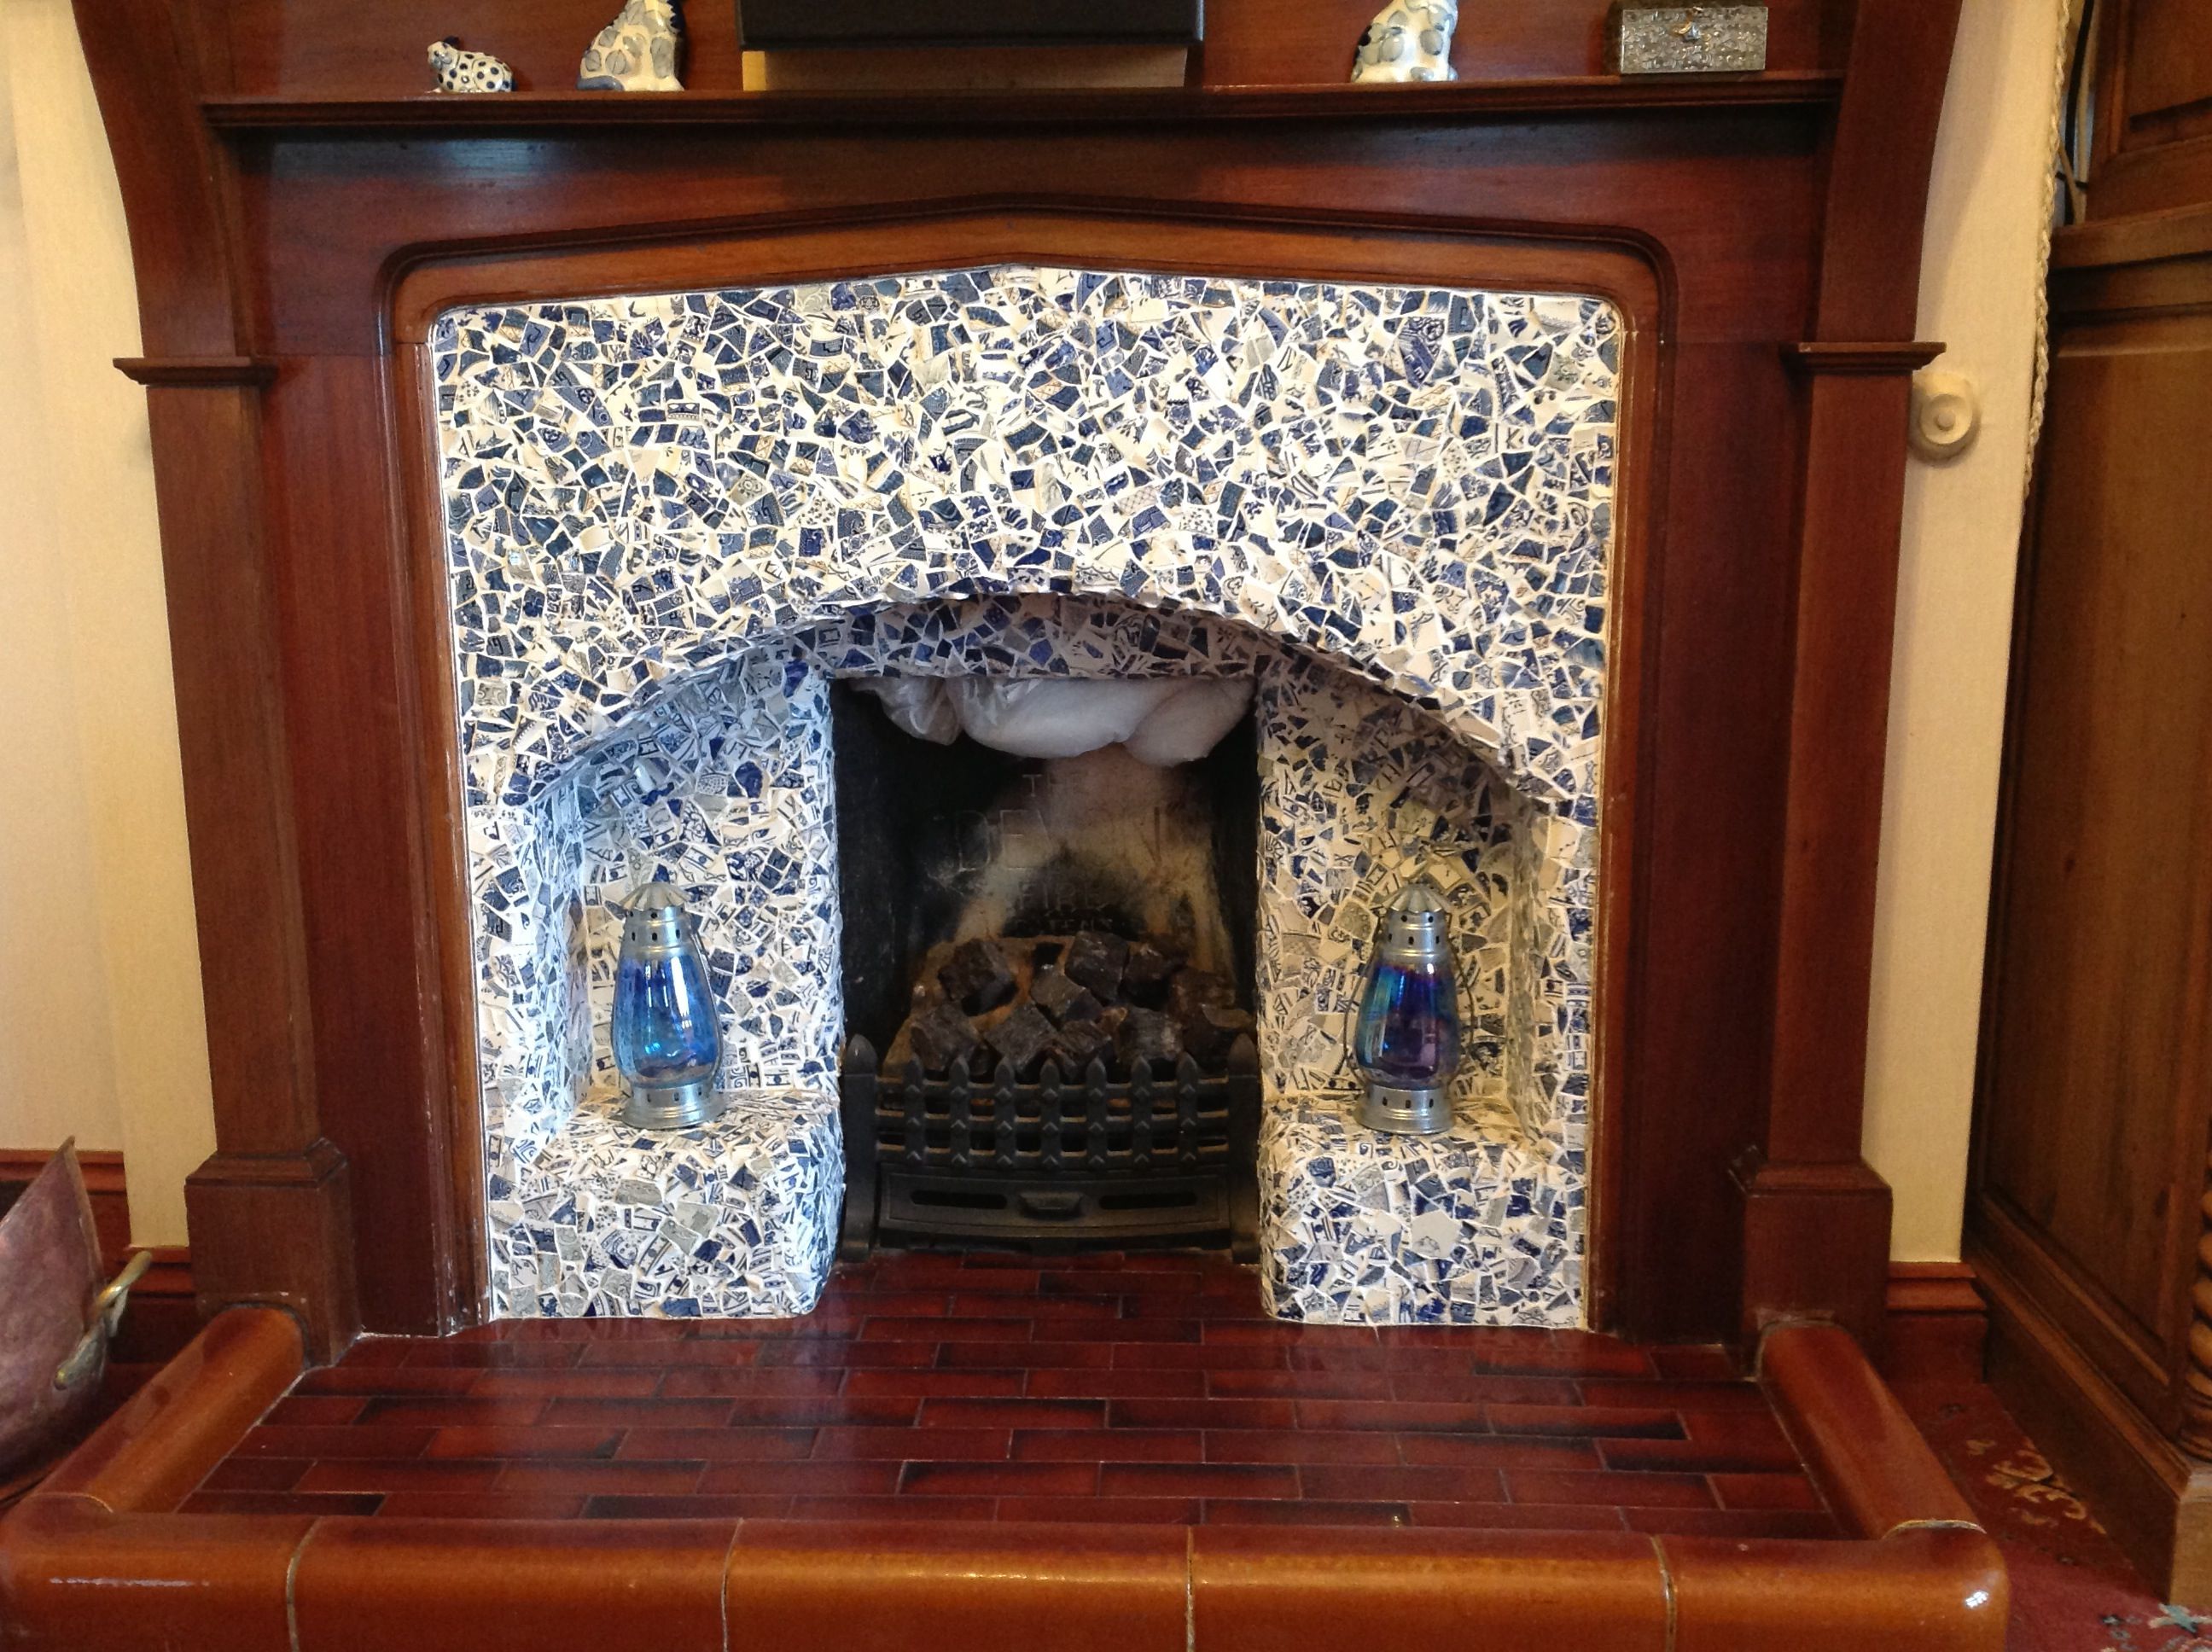 Royal Fireplace Inspirational Fireplace Mosaic Made From Blue and White China Pieces